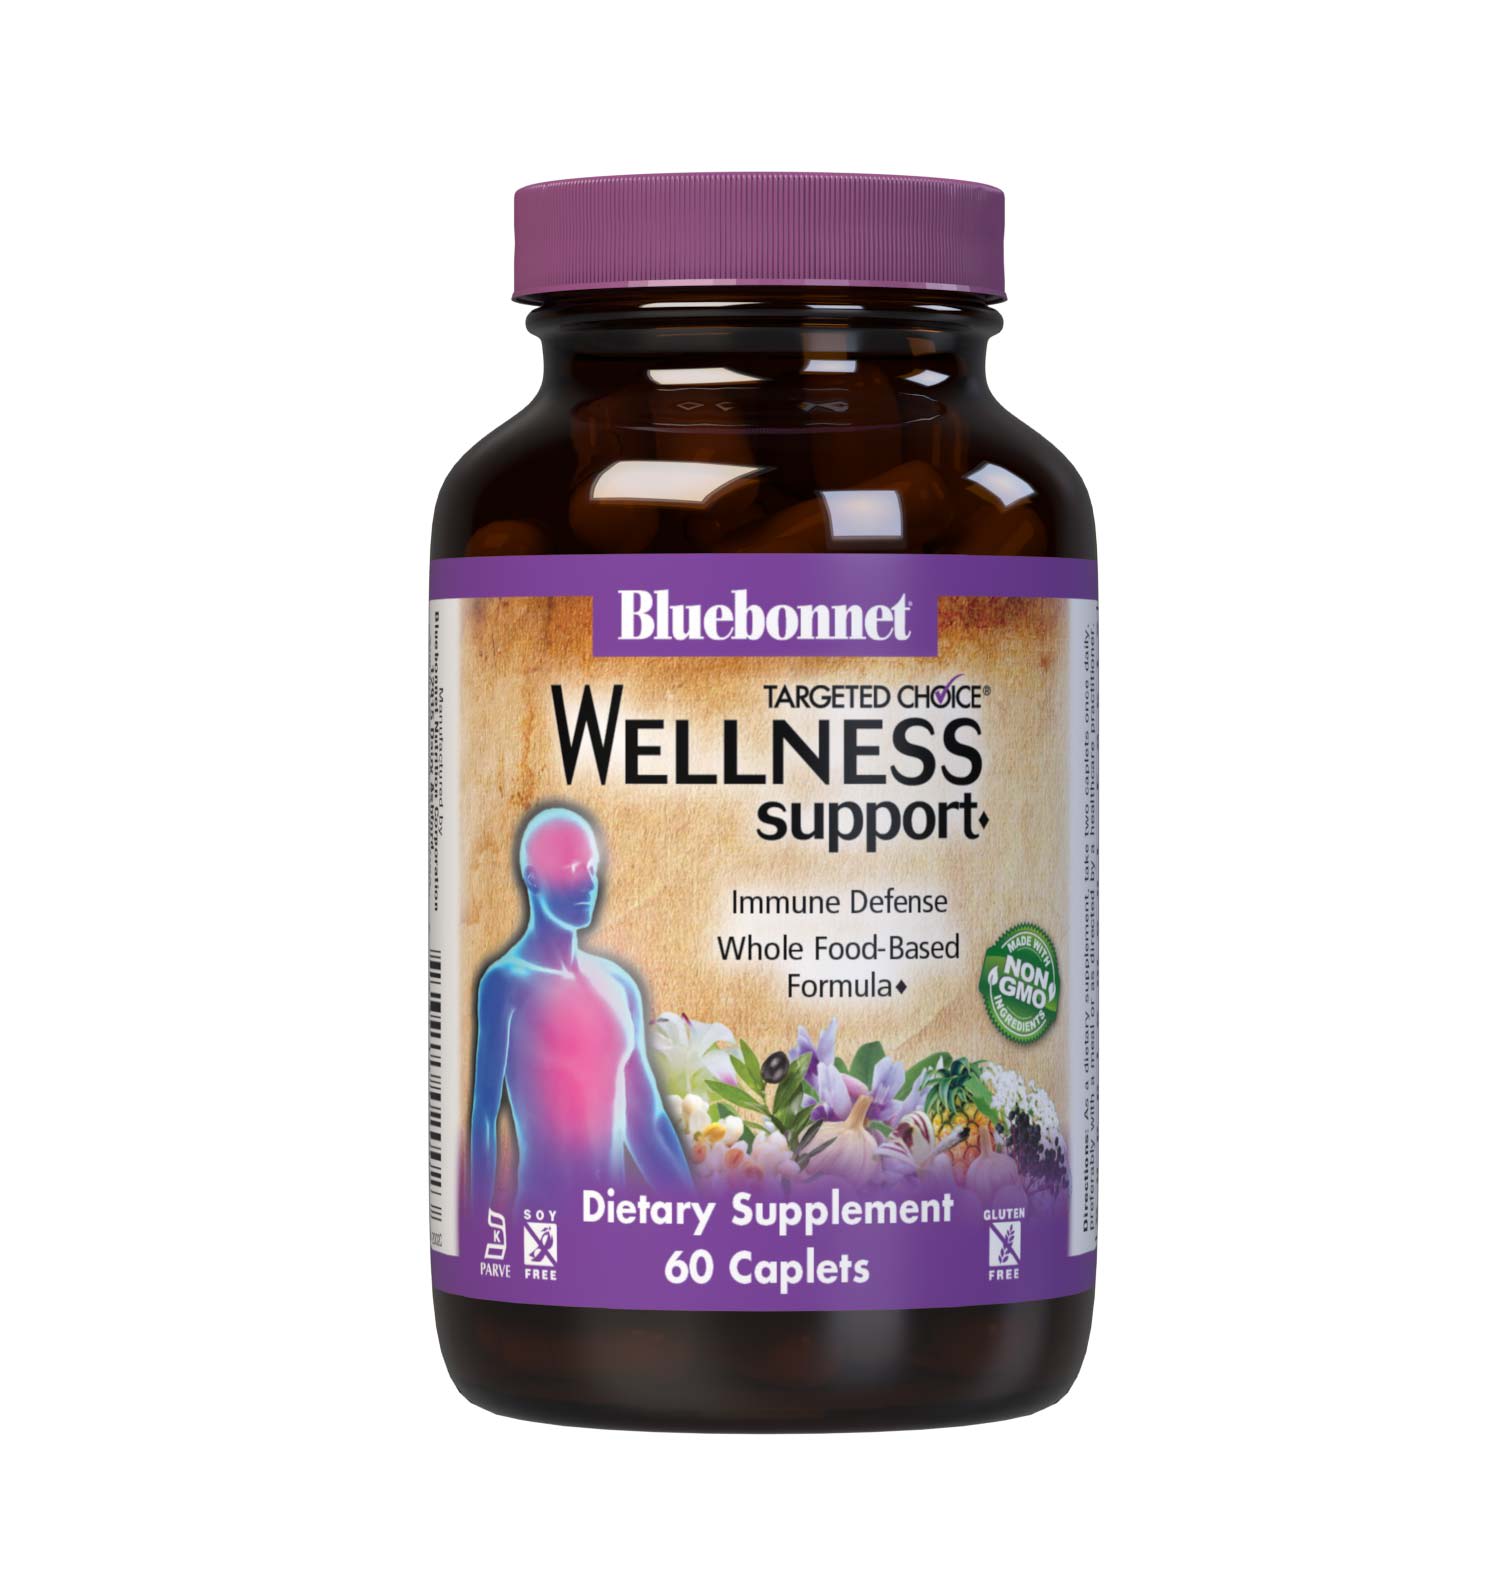 Bluebonnet’s Targeted Choice Wellness Support 60 Caplets are formulated with a complementary combination of non-GMO nutrients and sustainably sourced herbal extracts, such as vitamins A, C & D3, NAC, quercetin, zinc, andrographis, astragalus, elderberry, odor-less garlic, olive leaf, stinging nettle and turmeric.  #size_60 count